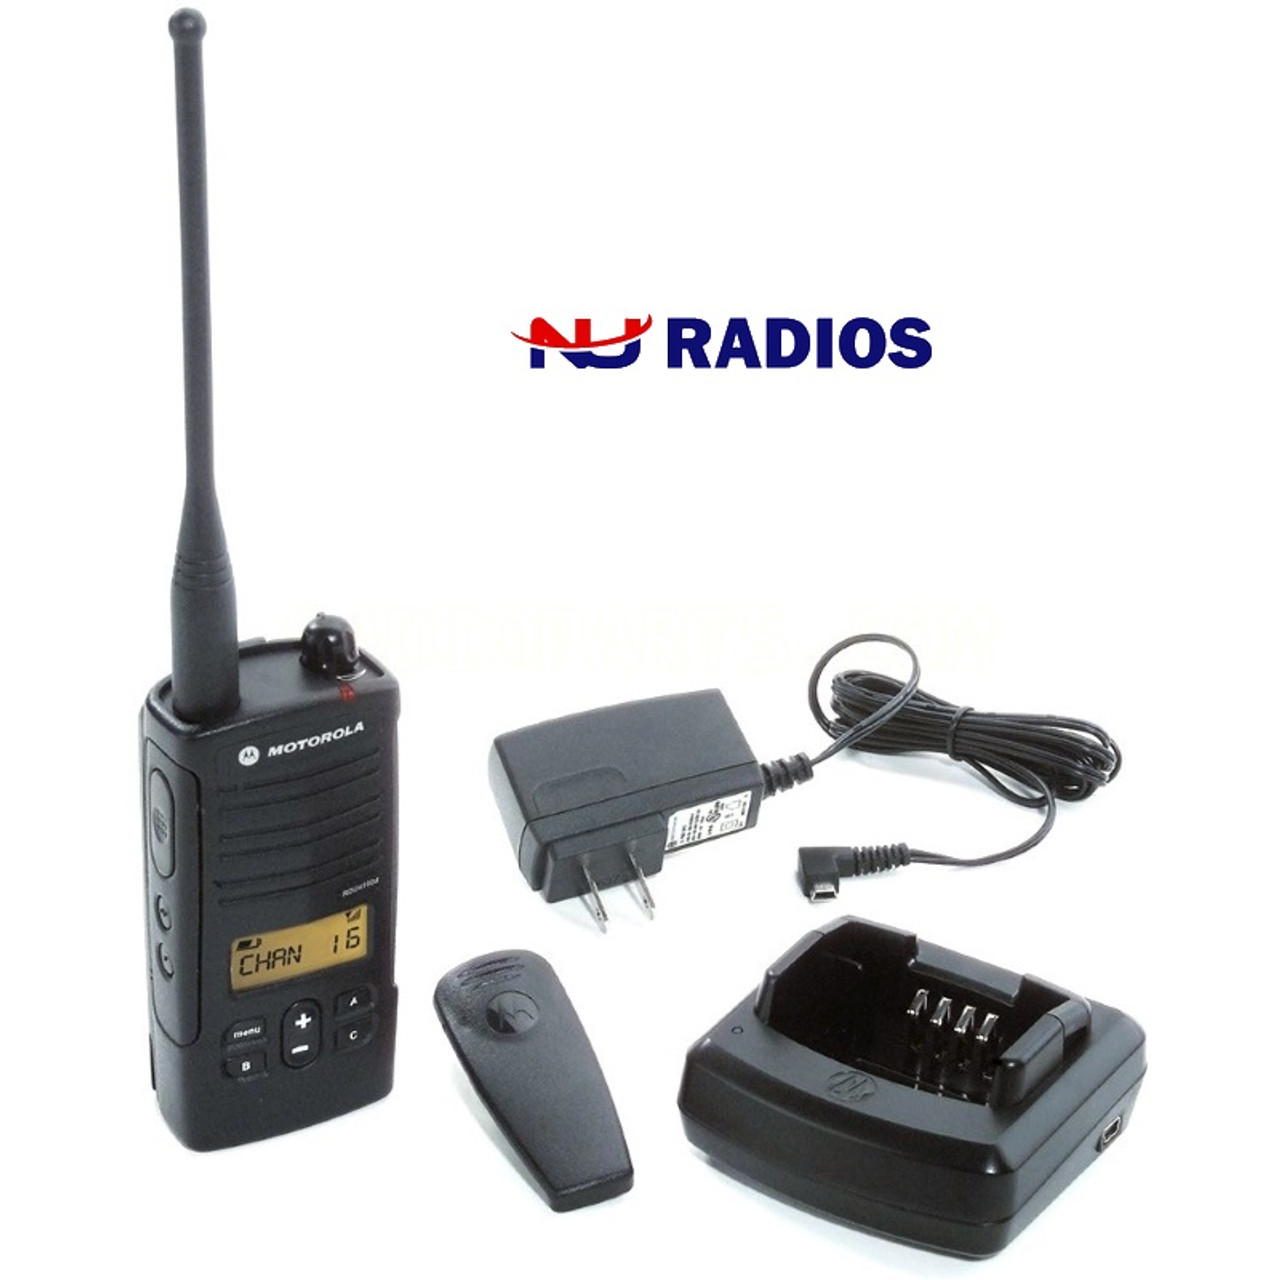 Motorola RDU4160D has a an easy to read Display and is Watts. This radios  is a workhorse and gets the job done. Perfect for construction sites,  schools, large warehouses and malls.